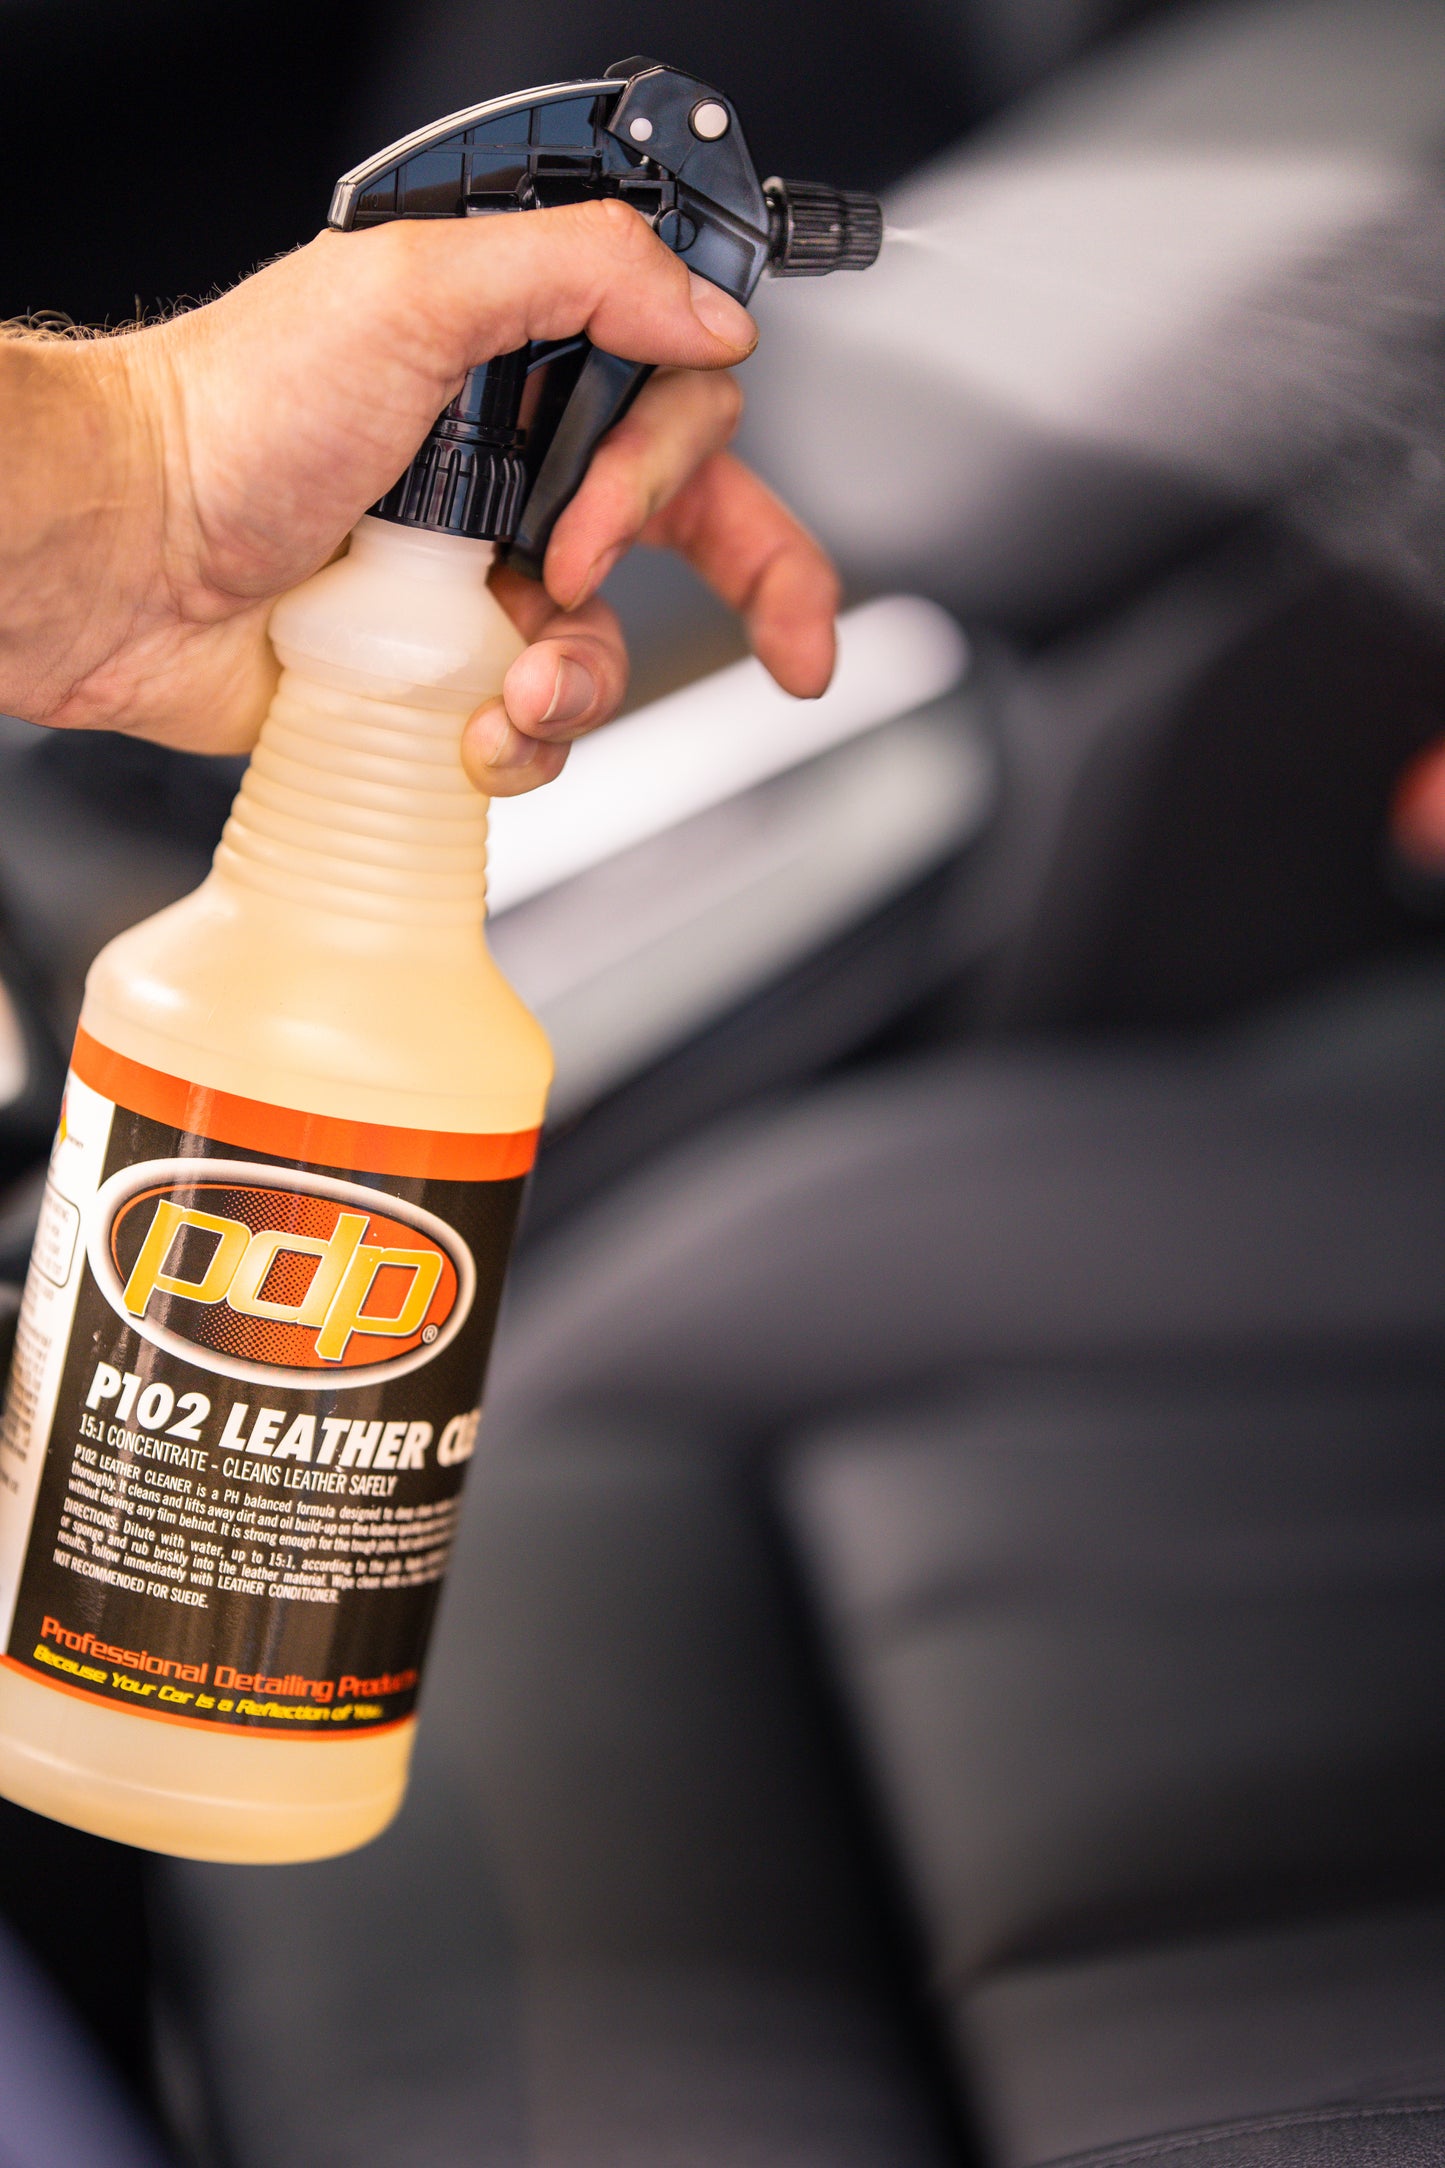 P102 Leather Cleaner